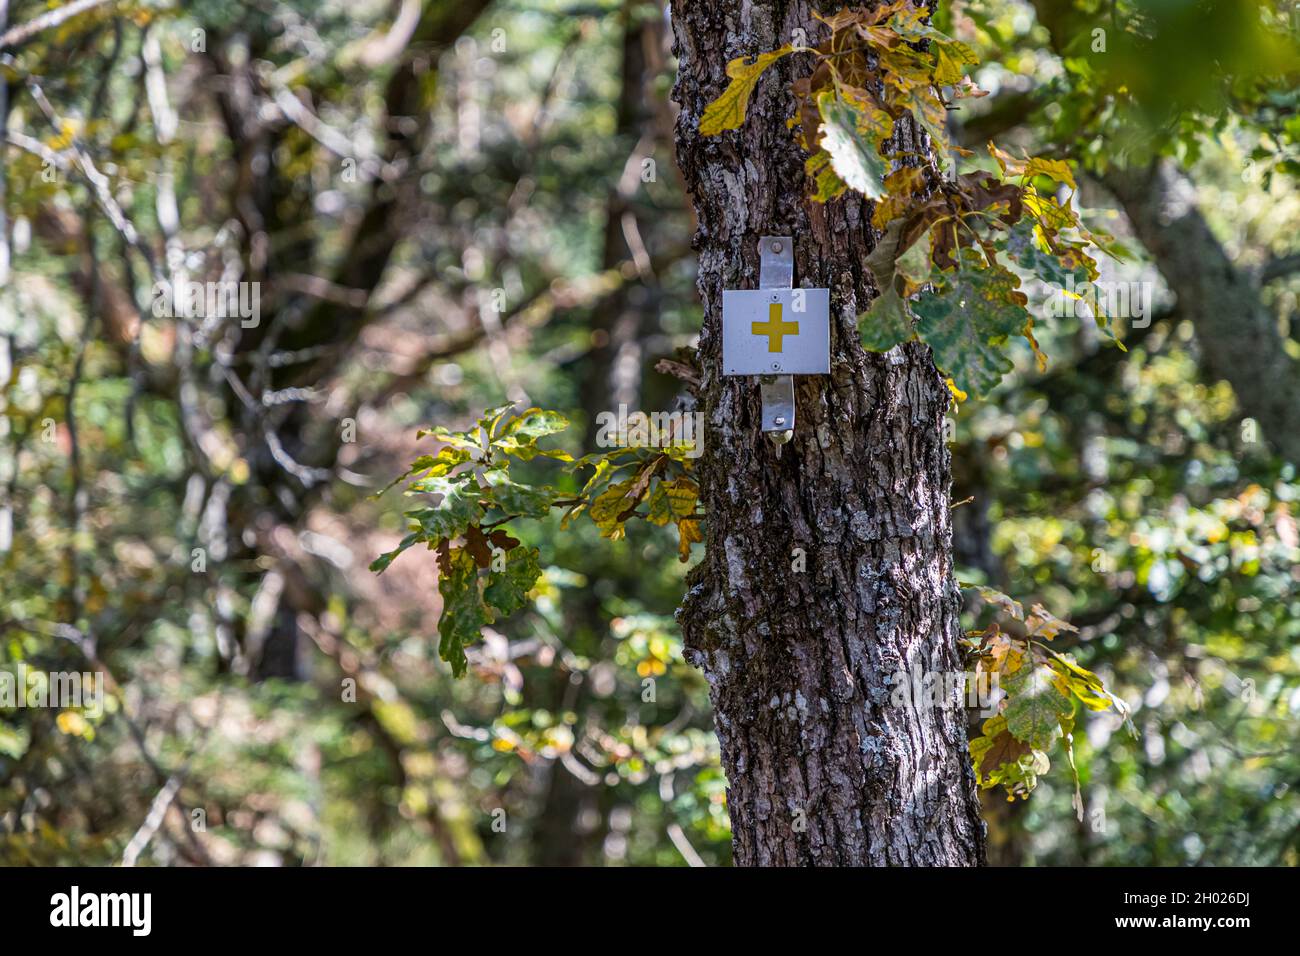 Hiking sign in the Vosges near Lautenbach, France Stock Photo